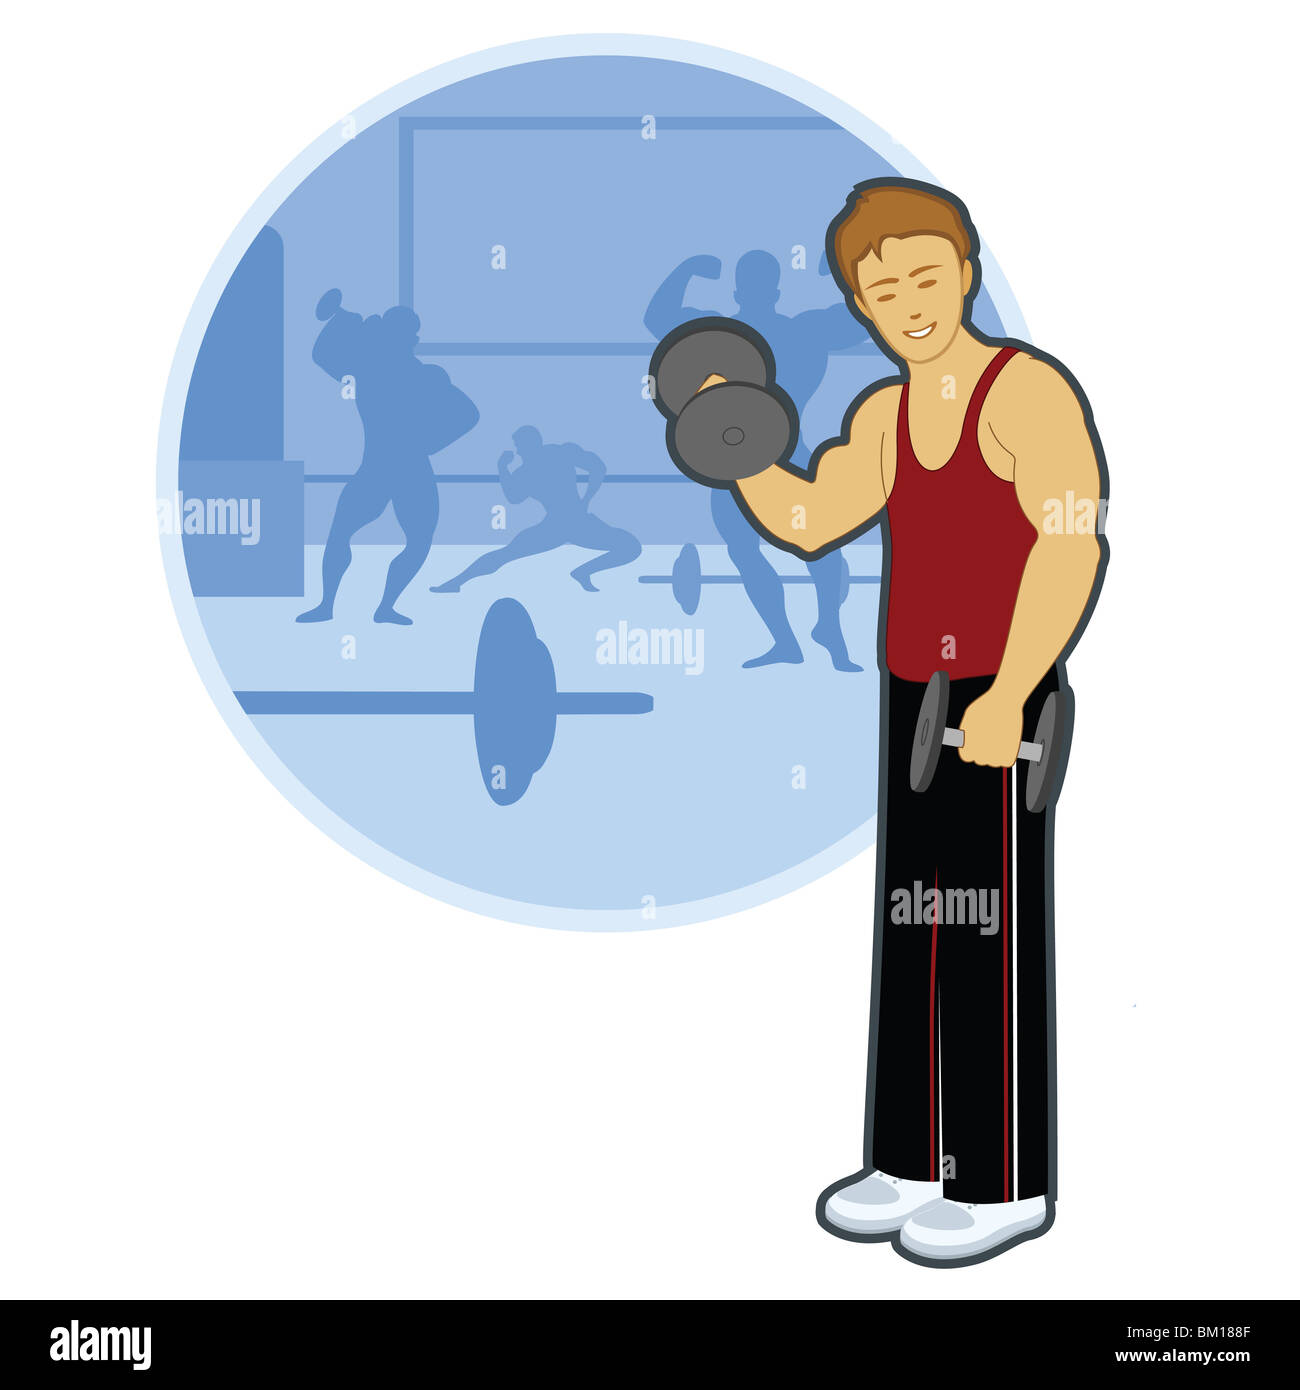 Man exercising with dumbbells in a gym Stock Photo